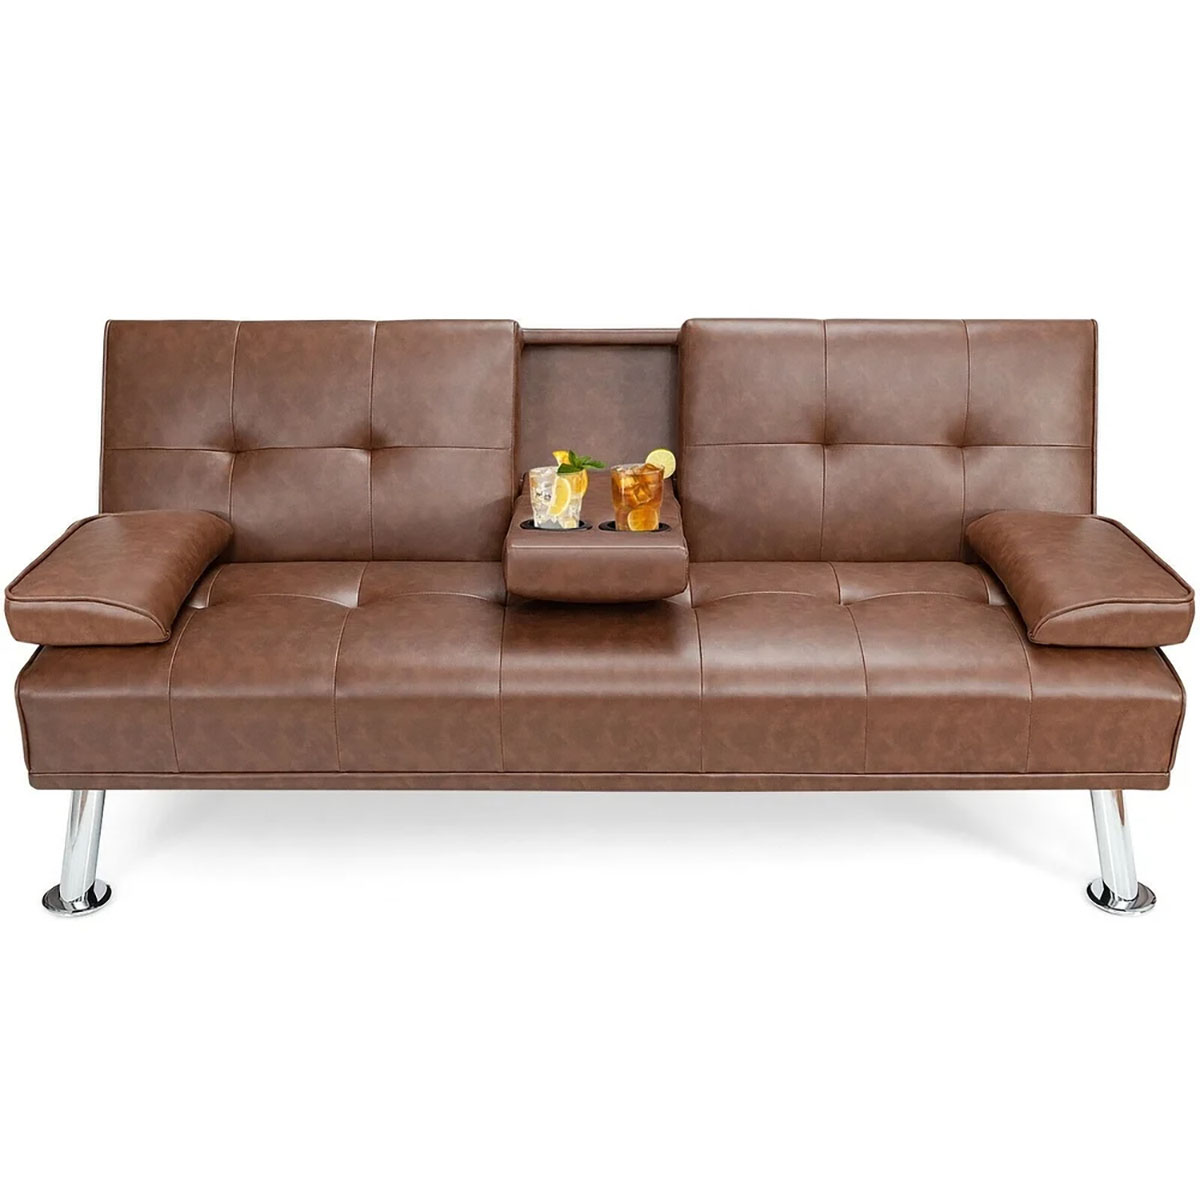 Photos - Sofa Goplus Convertible Folding Leather Futon  with Cup Holders and Armrest